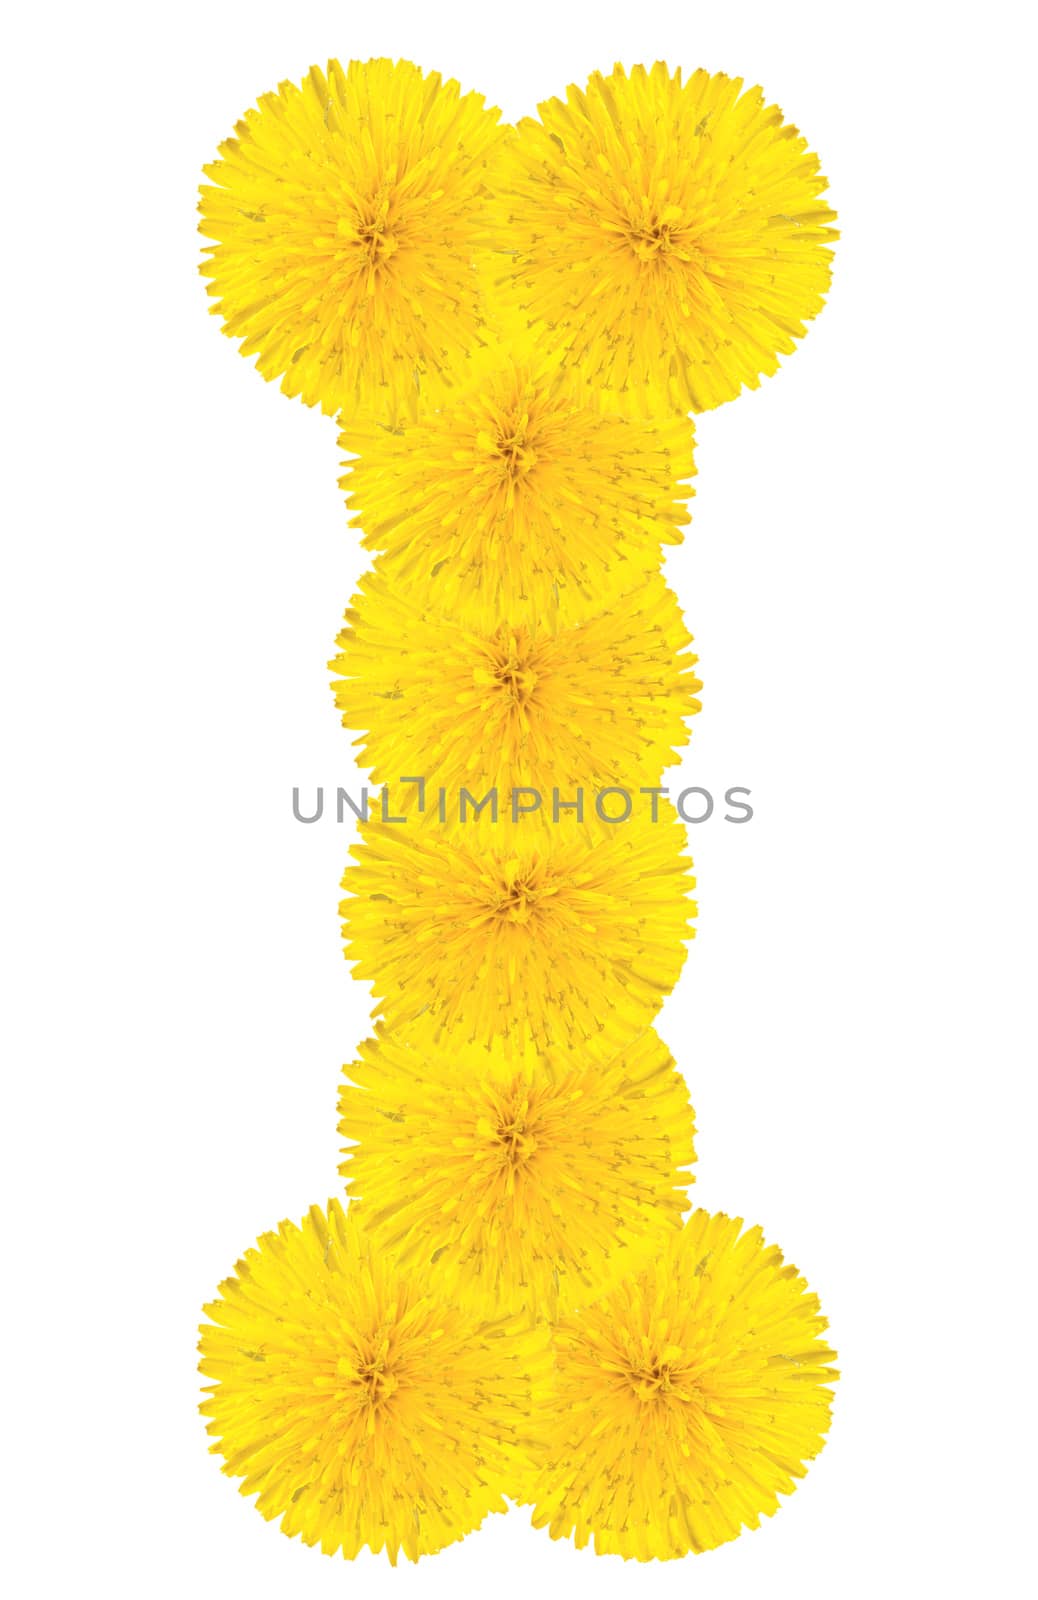 Letter I made from dandelion flowers isolated on white background